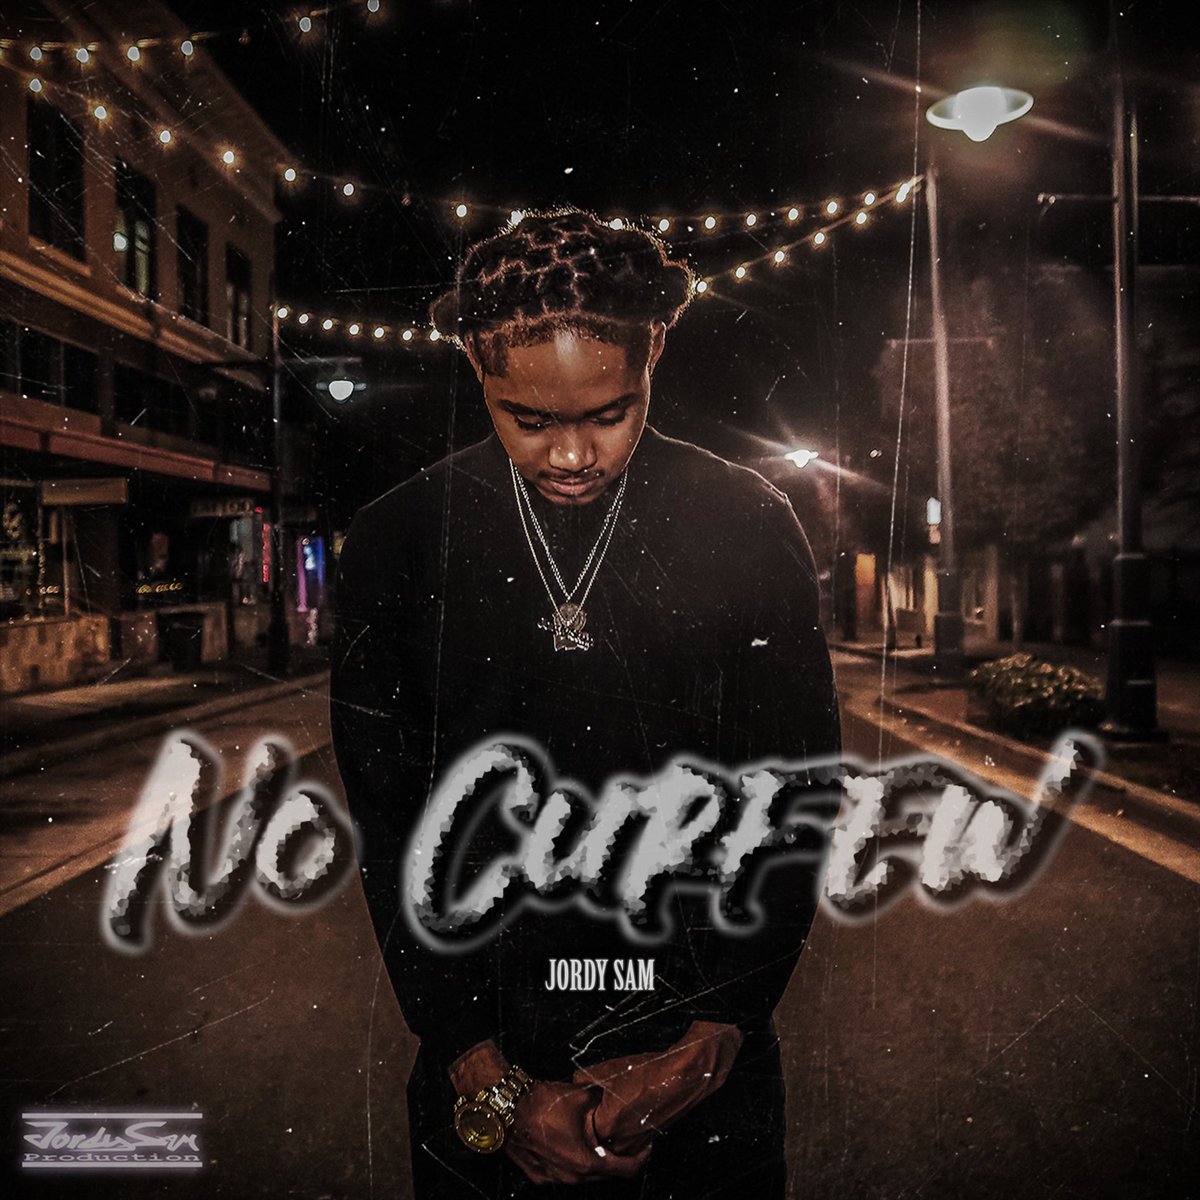 Y’all ready for some new music?!👀🎶 
“No Curfew” Prod. By me, PRE-ORDER COMING SOON!🤞🏽

📸 by: @Angeliqerose444 👑💙🔥
Cover art by: me!🙏🏽

#jordysam #jordysamproduction #newsingle #nocurfew 
#musicartist #producer #beatmaker #singersongwriter #explorepage #FridayVibes #hiphop